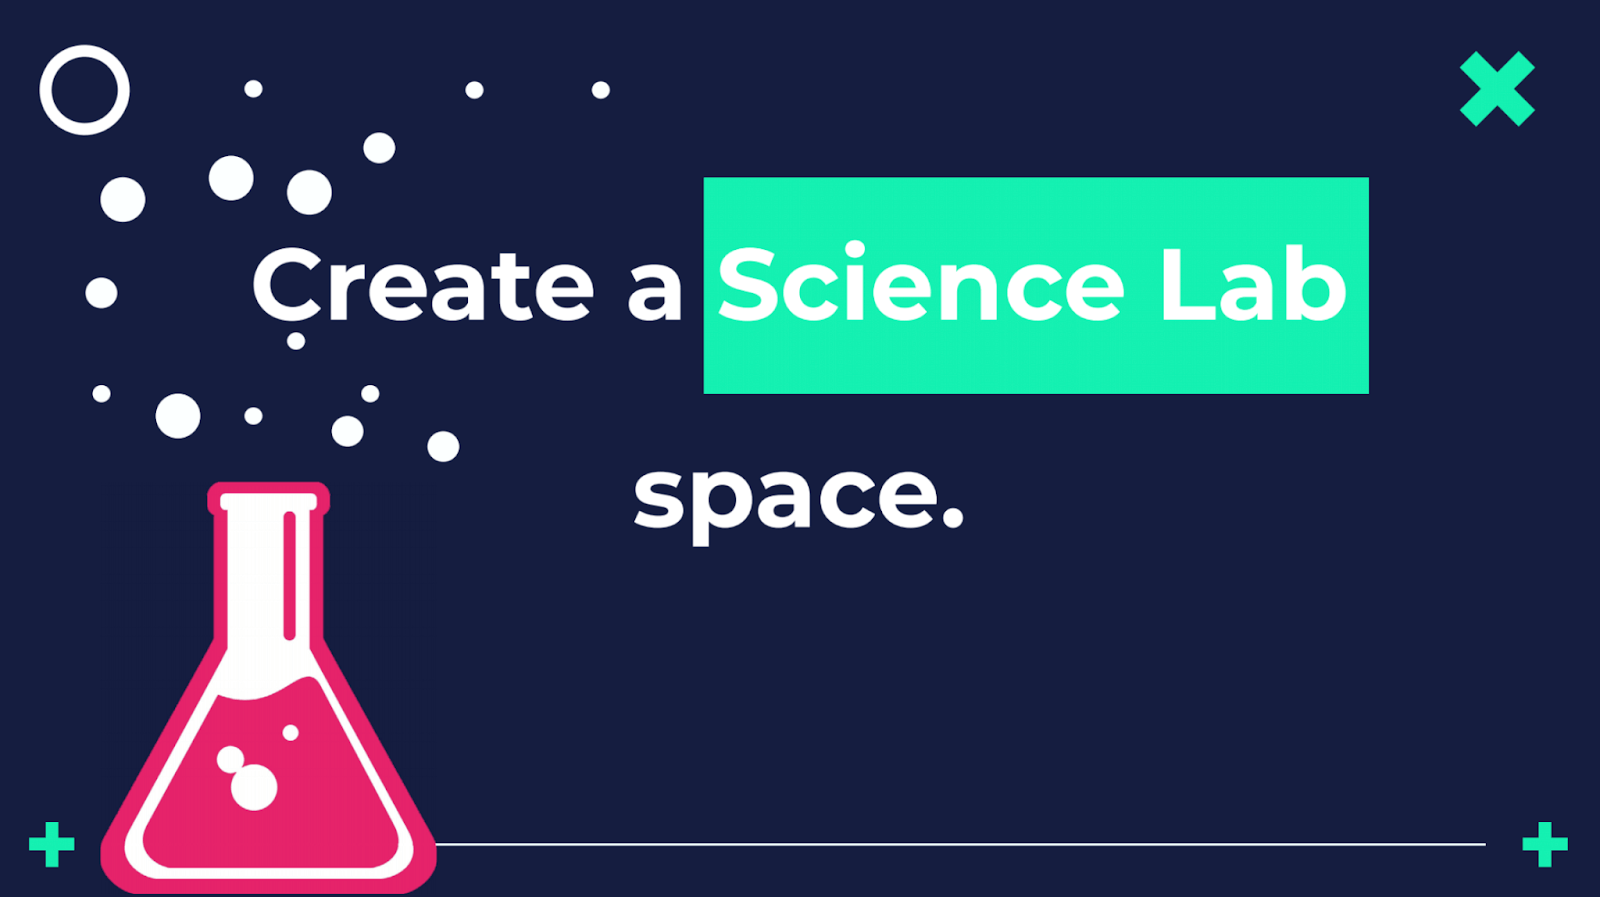 Create a science lab space